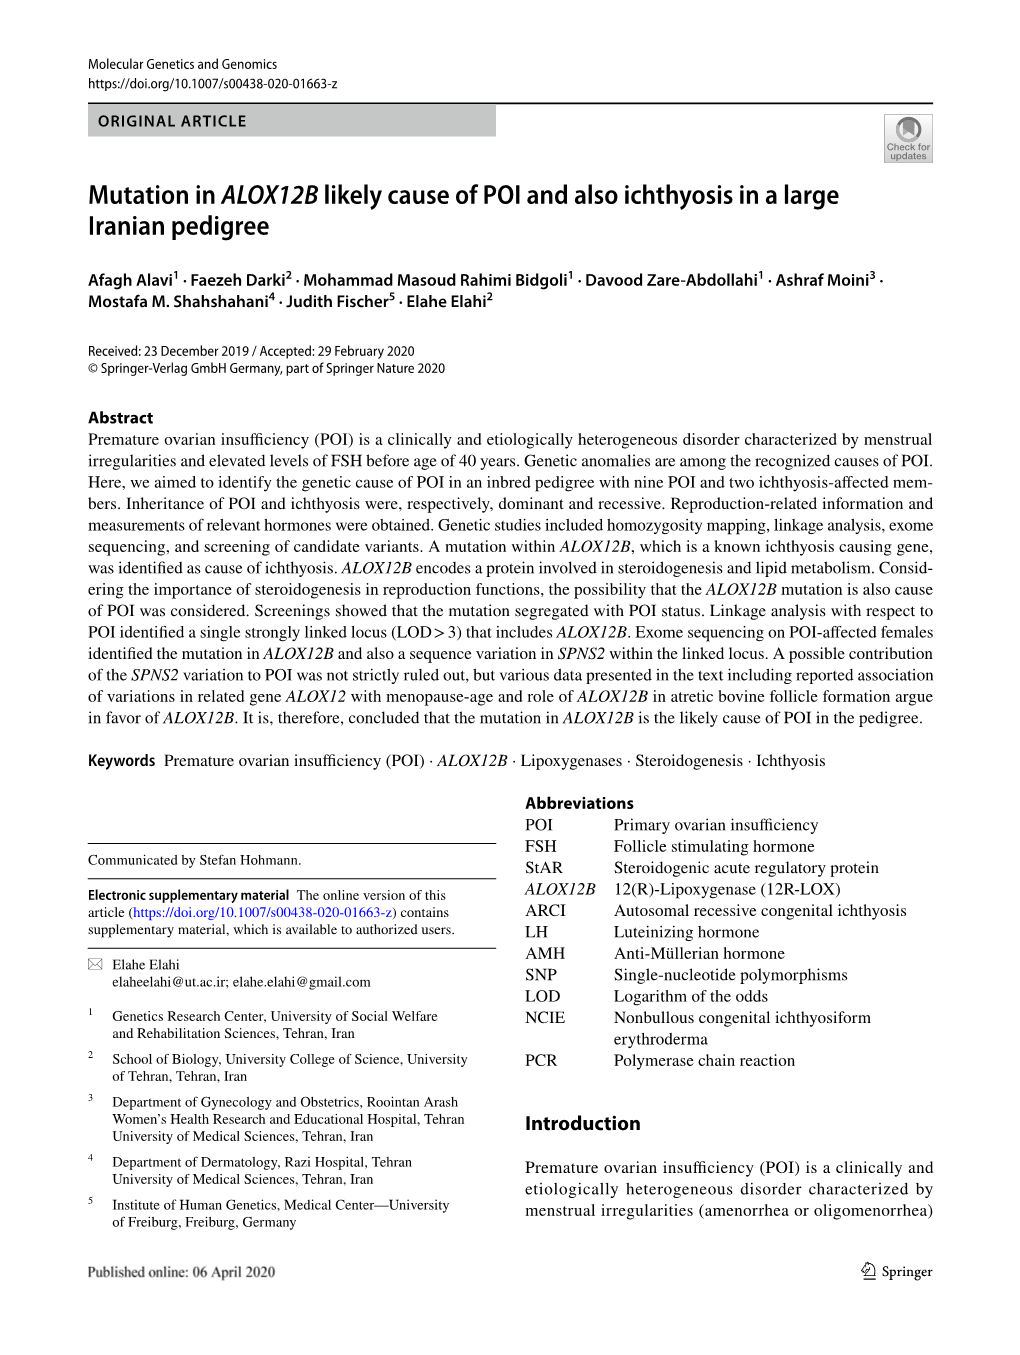 Mutation in ALOX12B Likely Cause of POI and Also Ichthyosis in a Large Iranian Pedigree